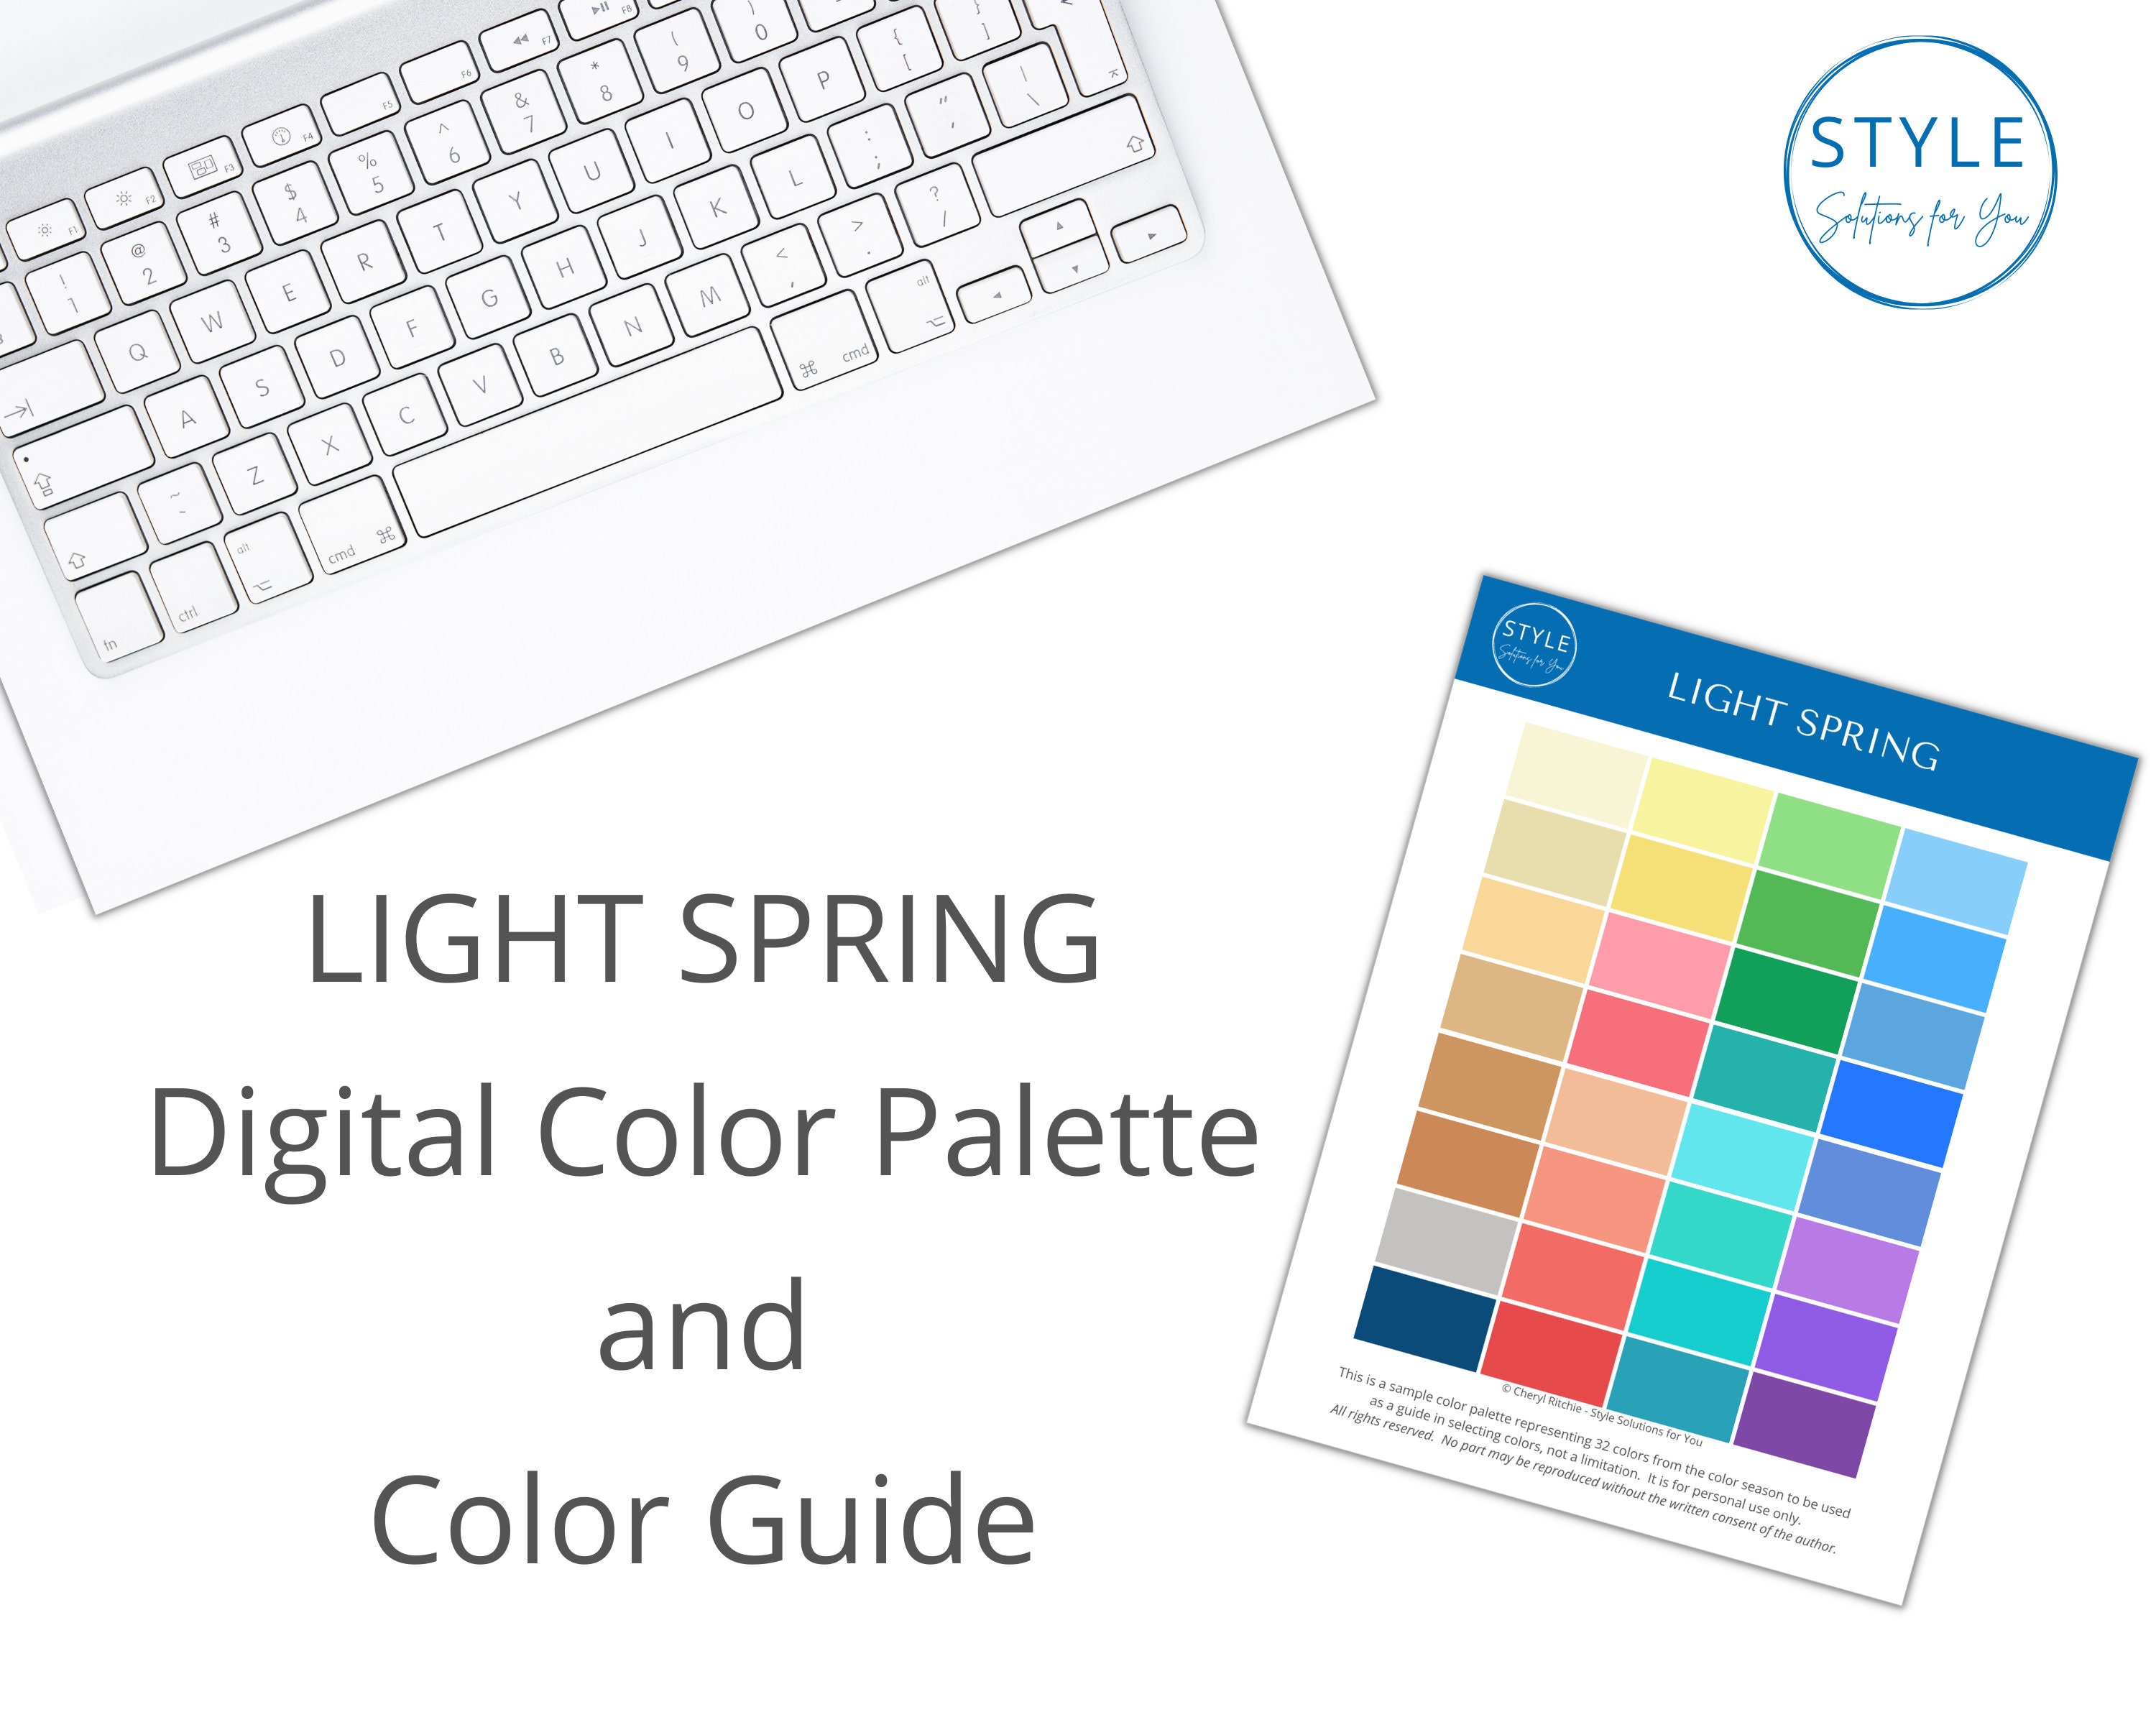 Seasonal Color Analysis Guide to Determine Your Color Season or